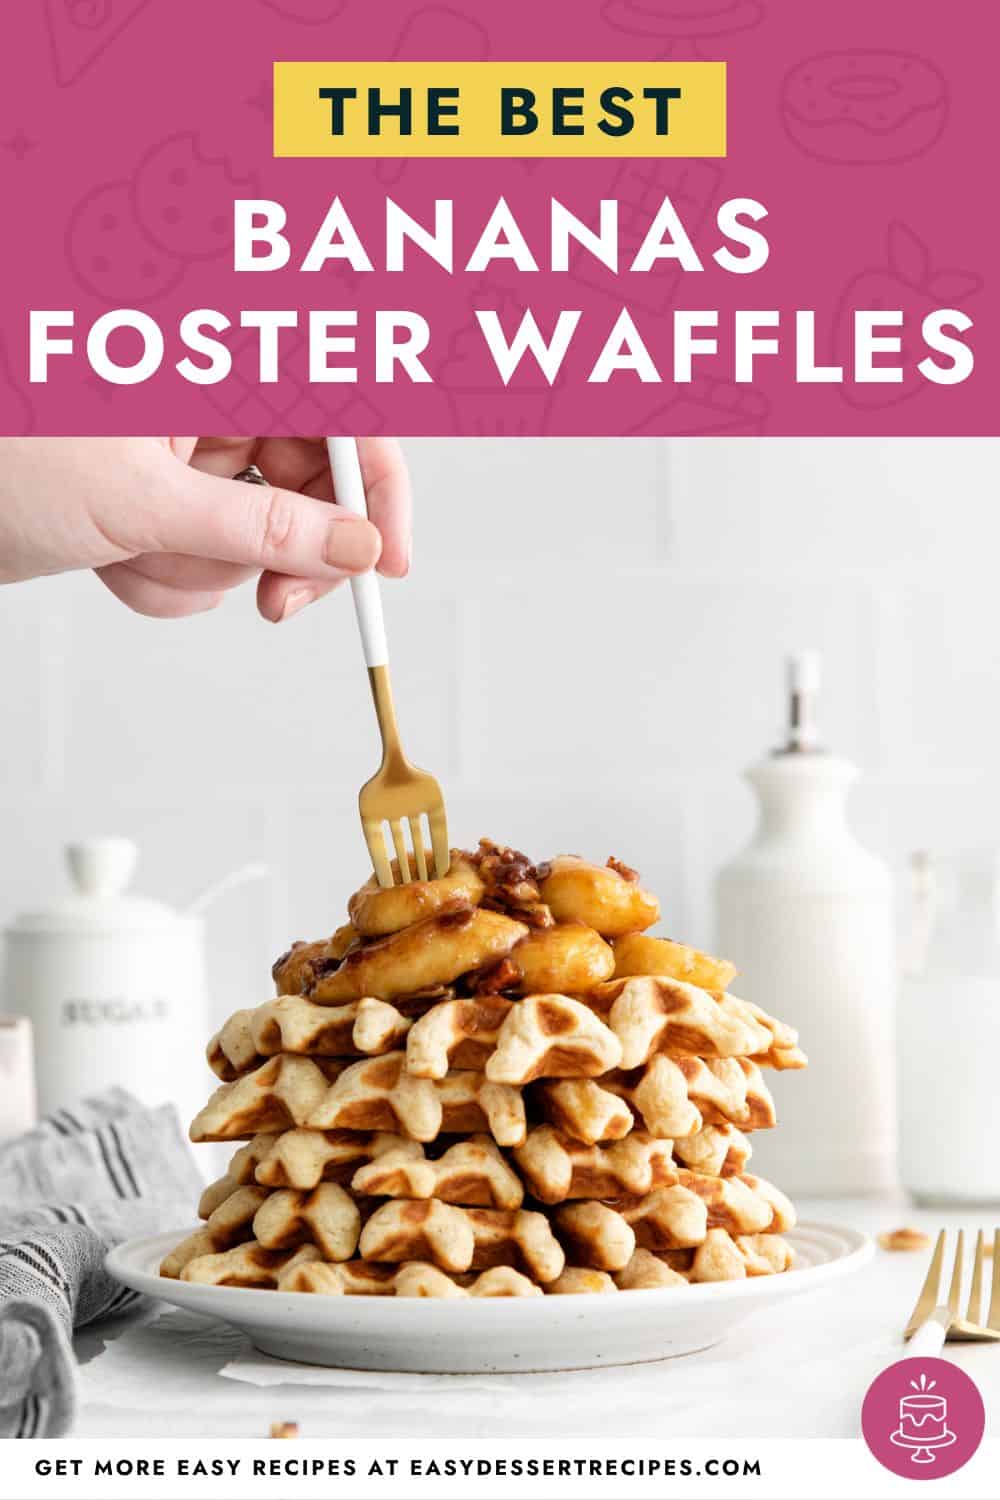 Pin: the best bananas foster waffles